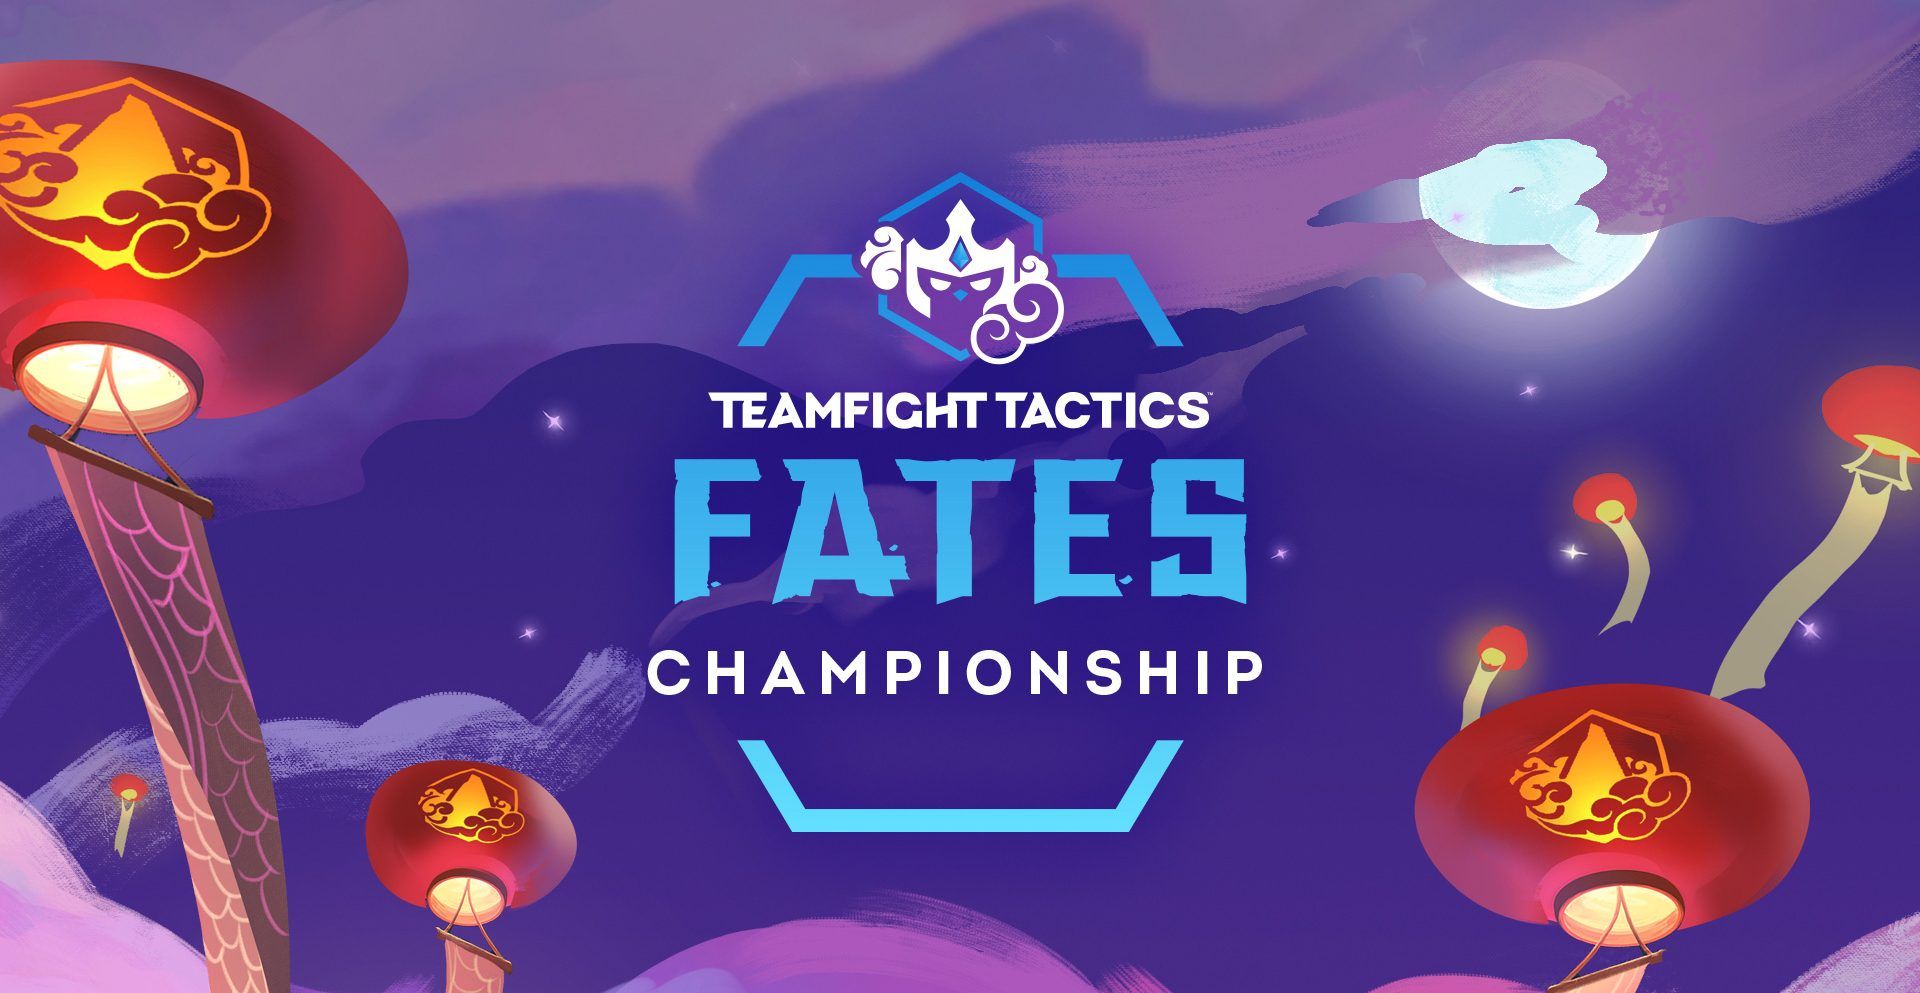 Teamfight Tactics Fates Championship Is The Next Global Tournament